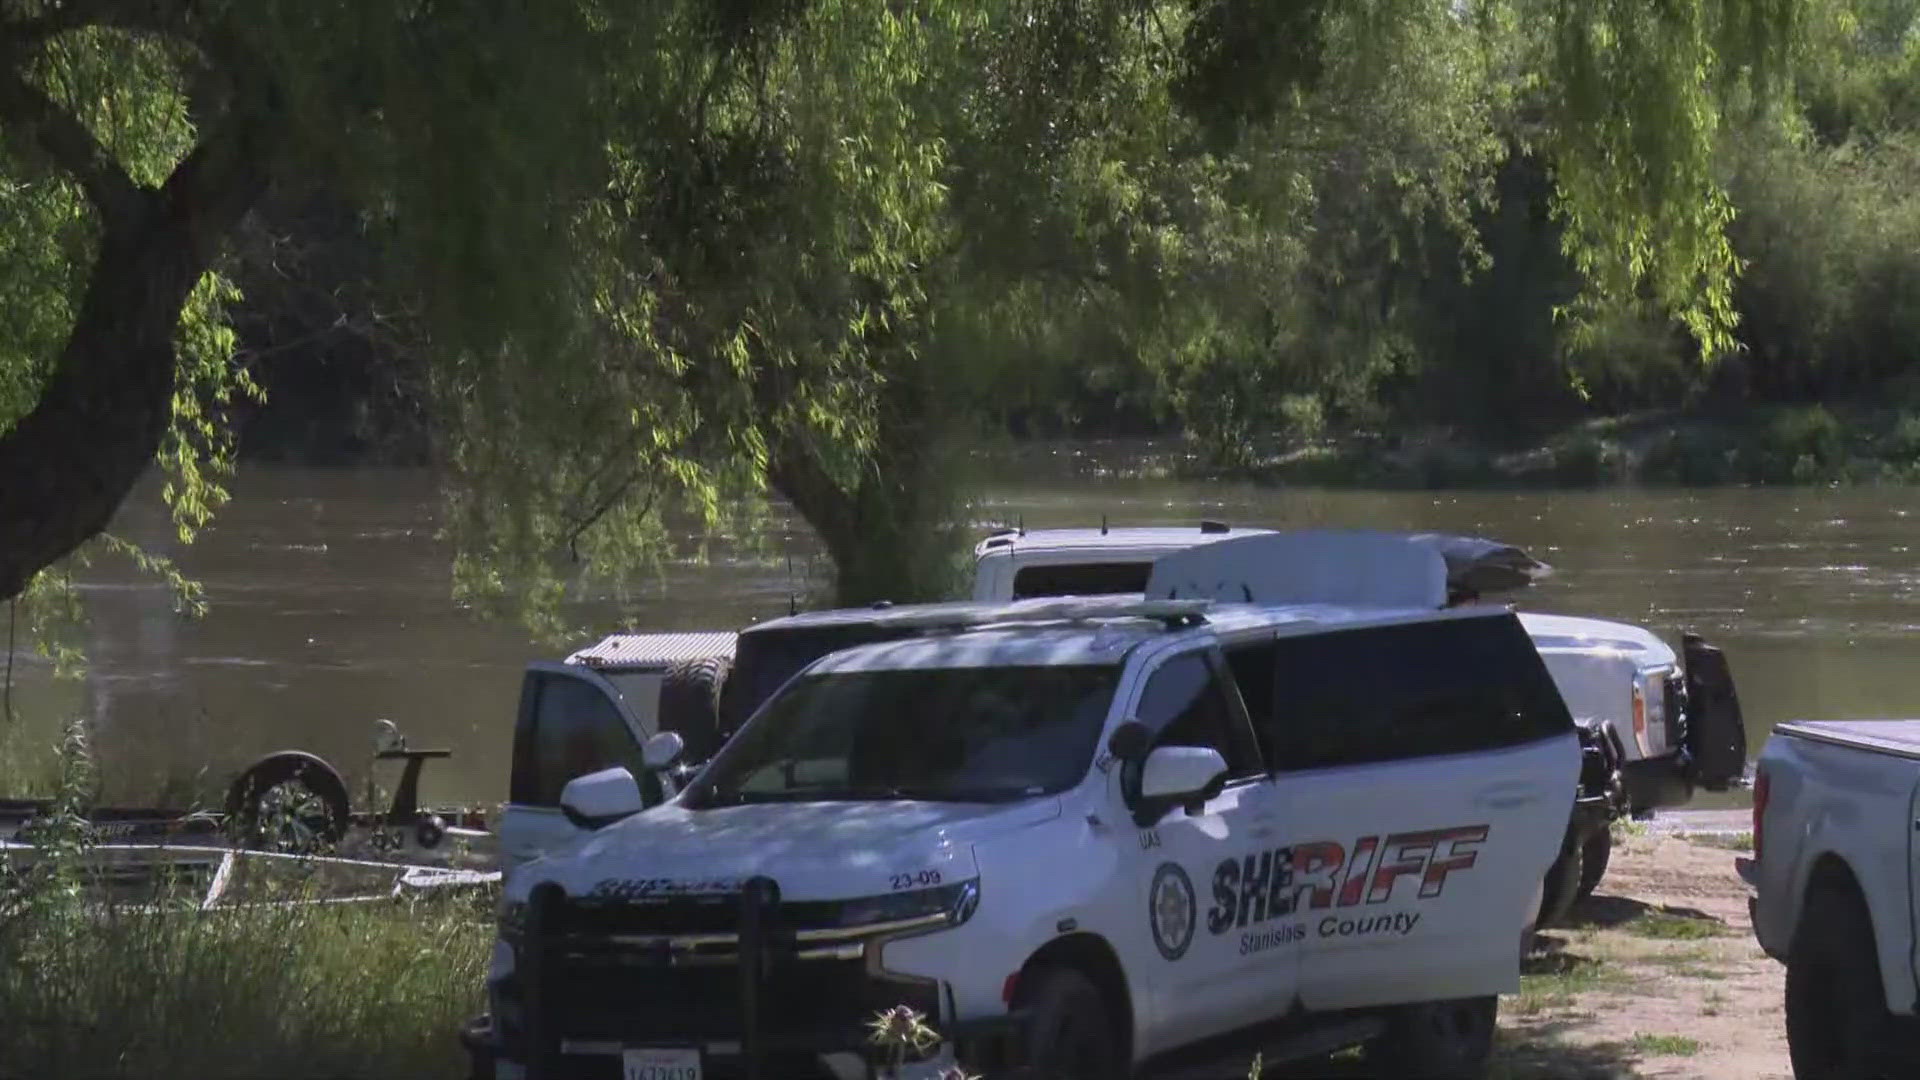 Brenda Duran was found Saturday after jumping into the San Joaquin River near Newman around 6:30 p.m. Thursday to rescue her 11-year-old daughter.